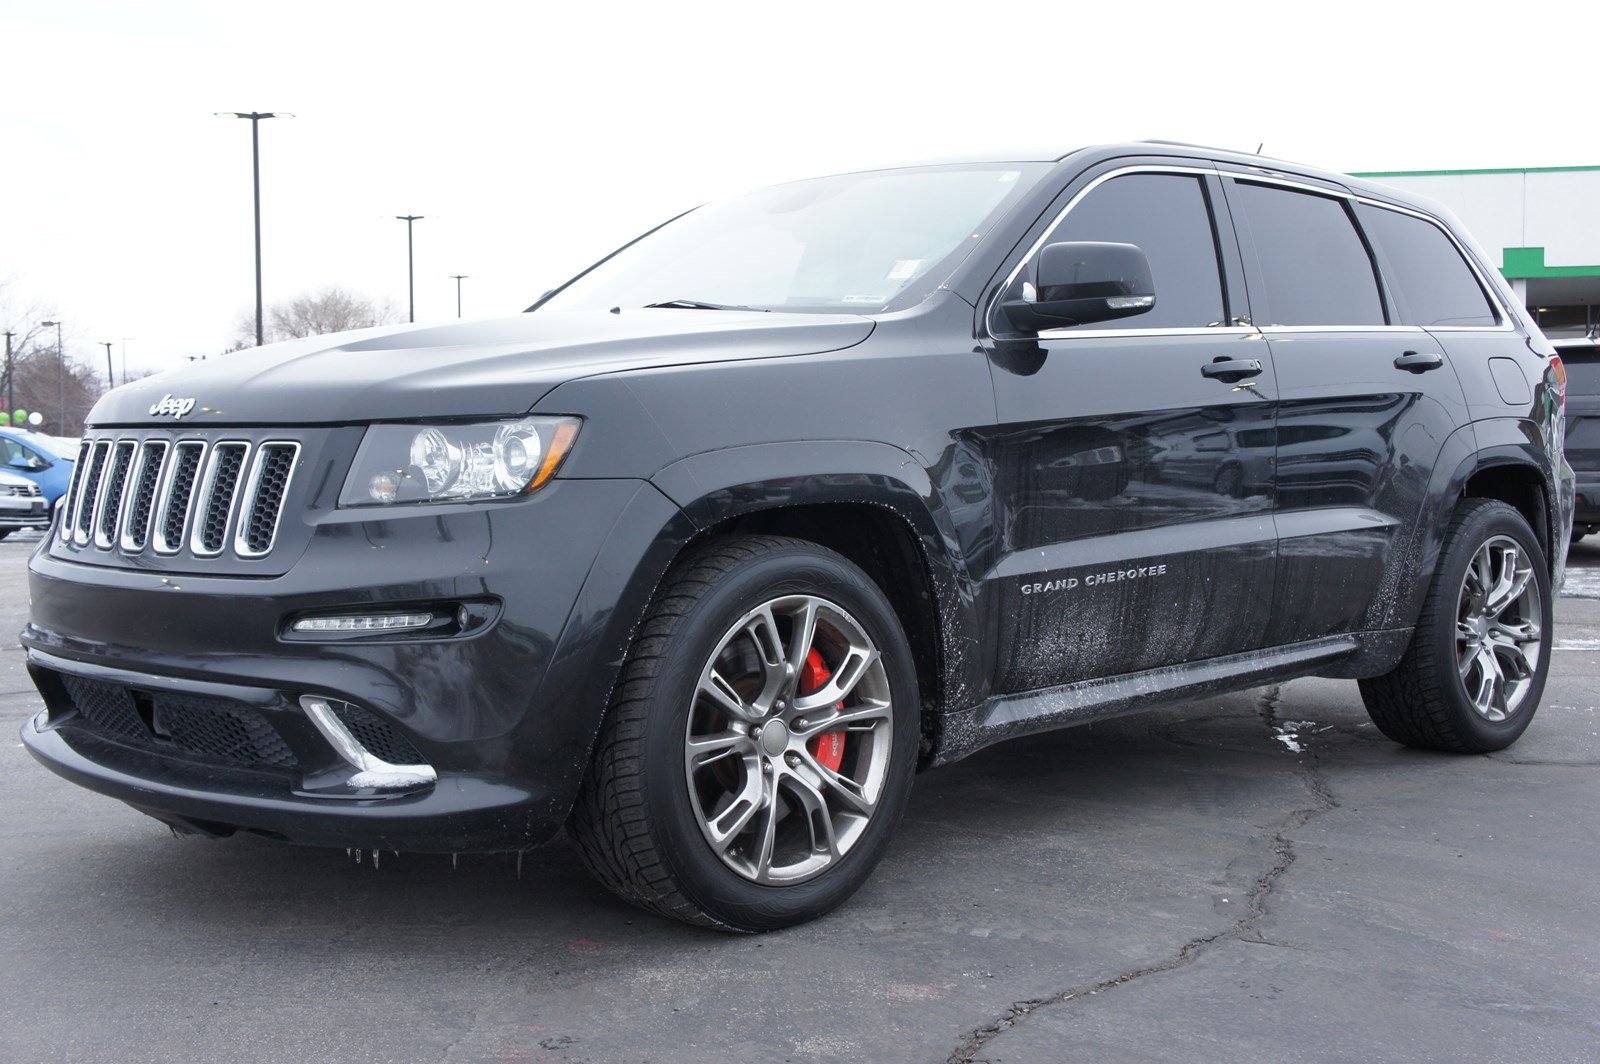 PreOwned 2012 Jeep Grand Cherokee SRT8 Sport Utility in